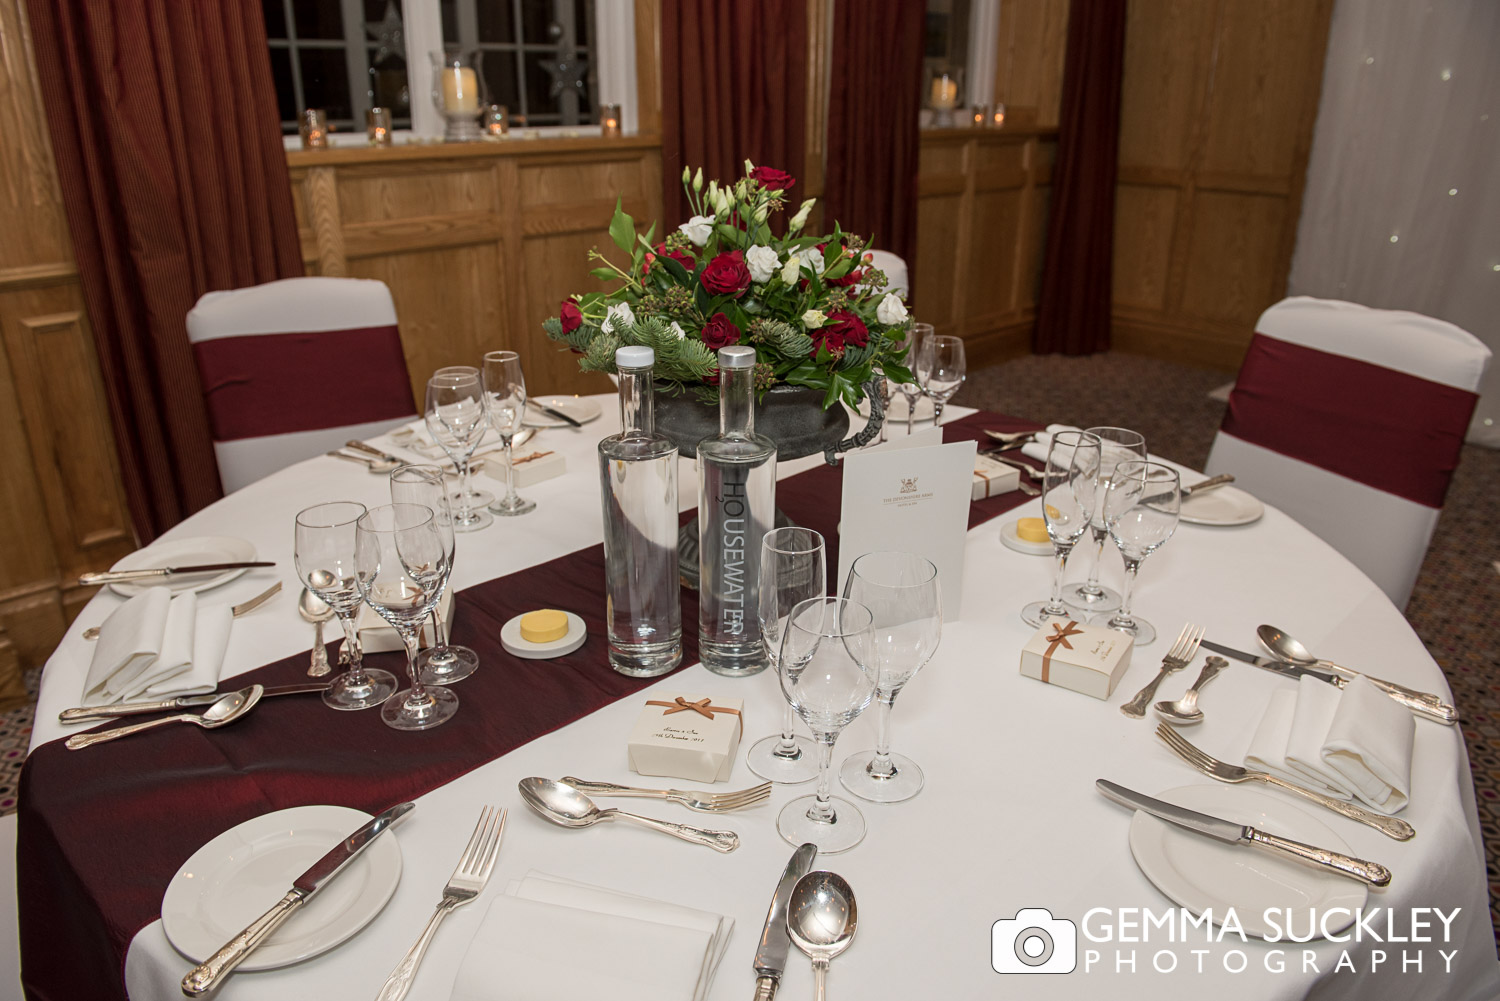 Wedding breakfast seating at the devonshire arms at bolton abbey